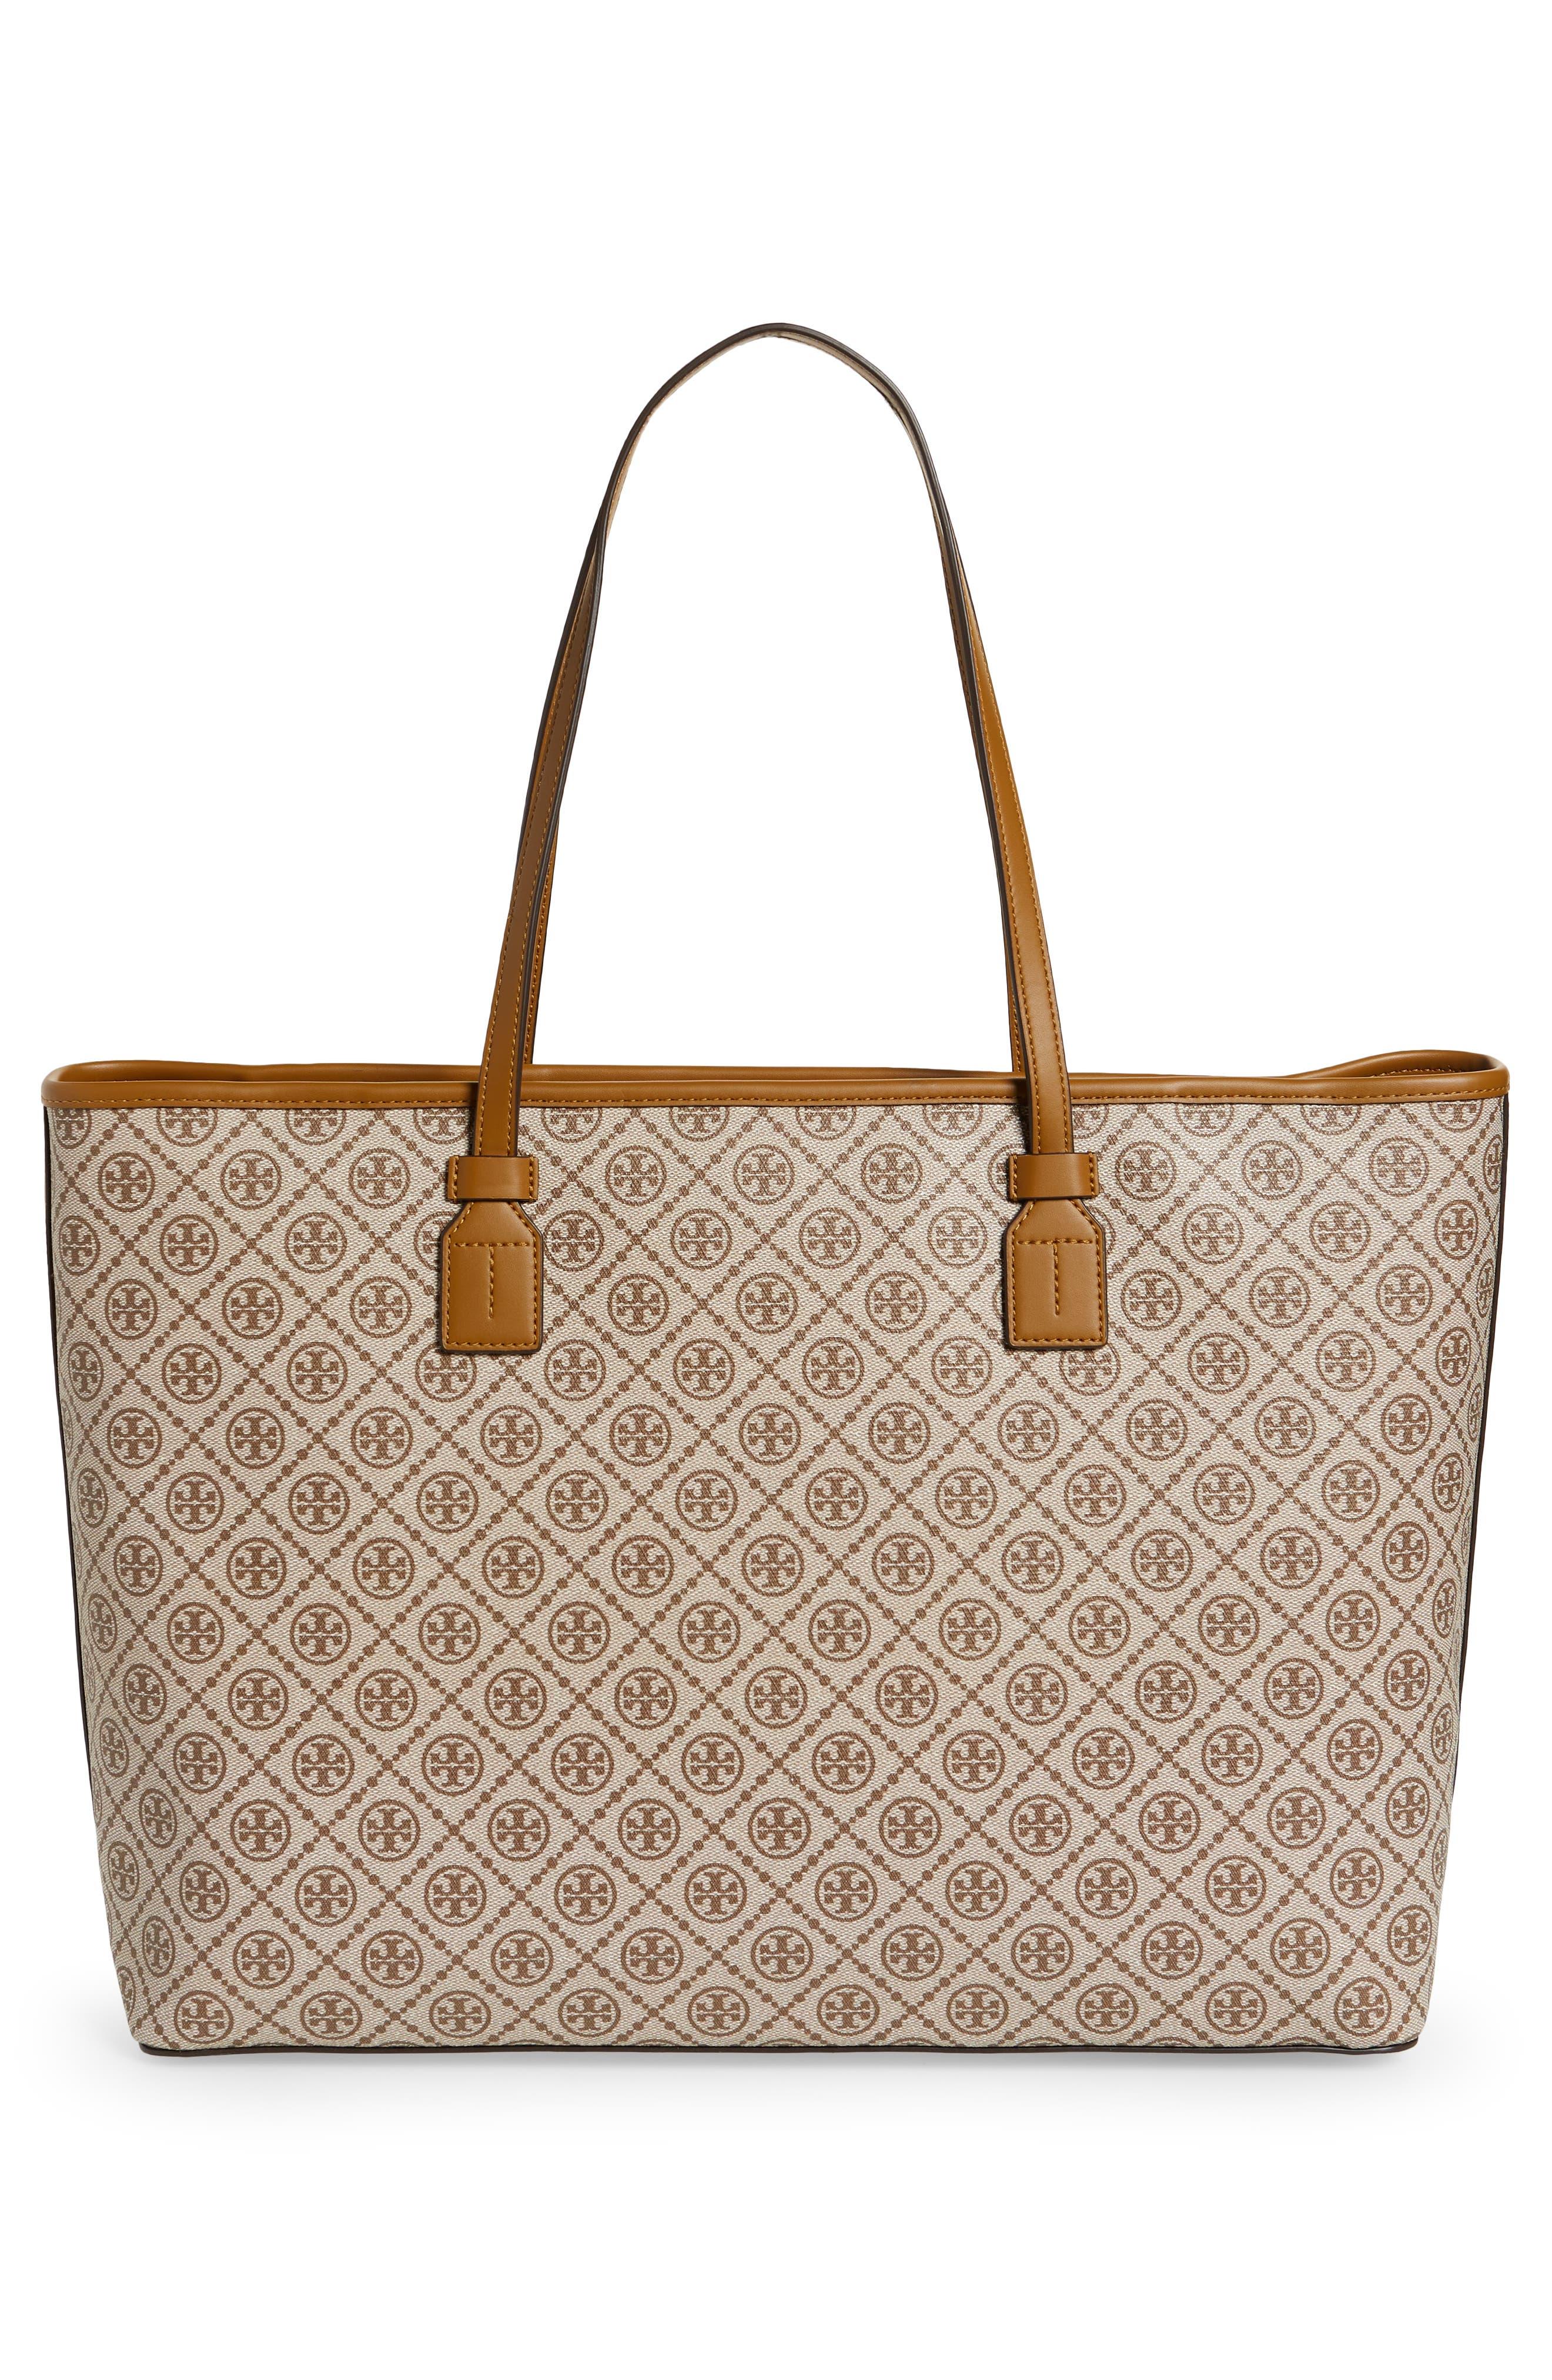 Tory Burch, Bags, Tory Burch T Monogram Coated Canvas Tote Nwt